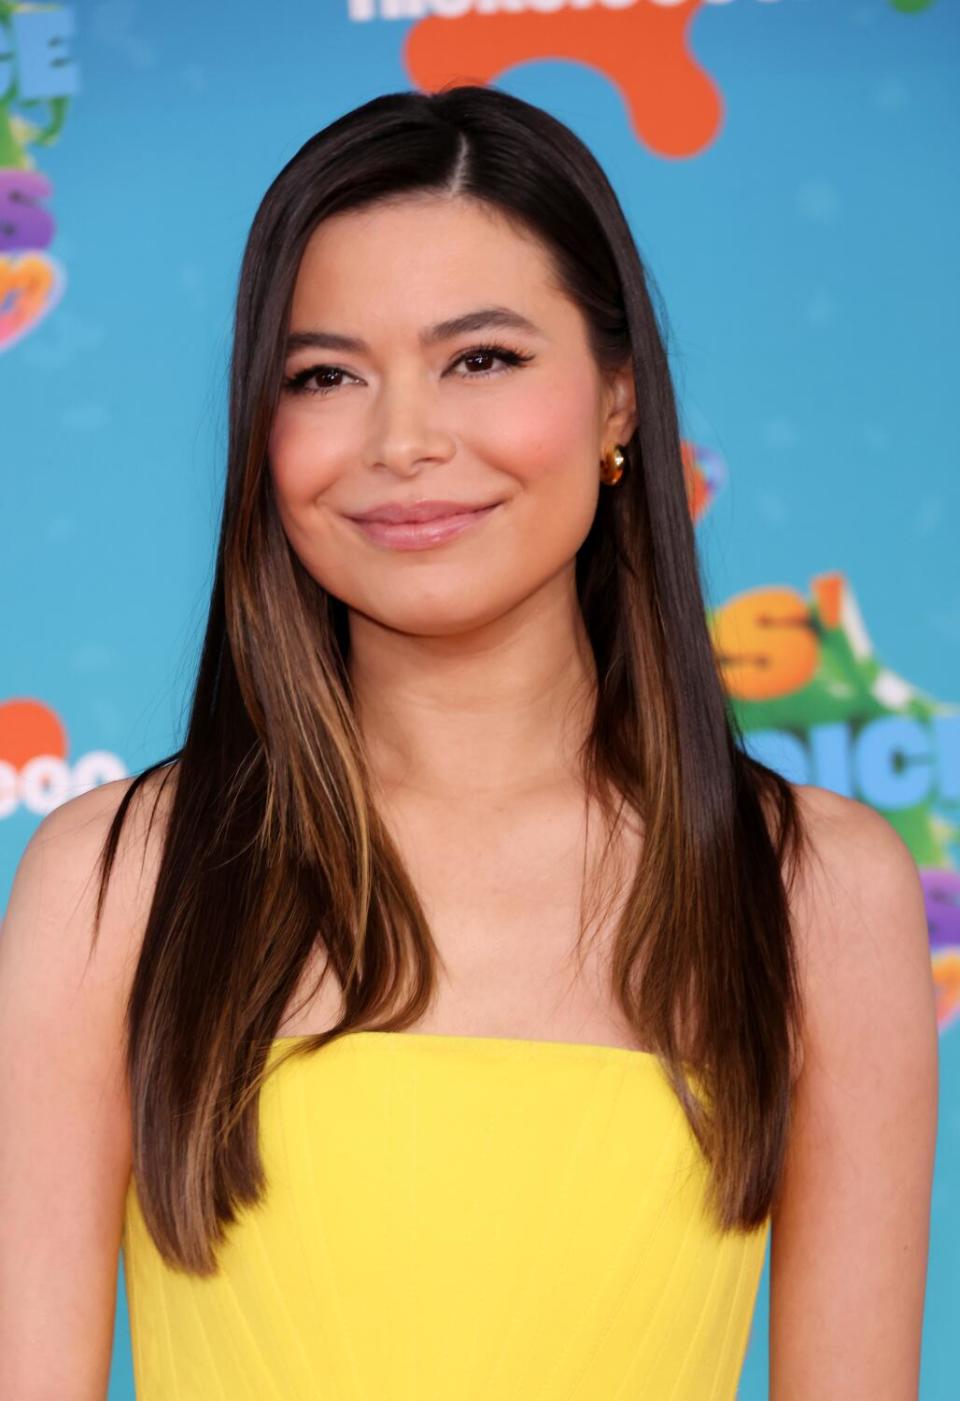 Miranda Cosgrove, wearing a yellow strapless dress, poses in front of a blue Nickelodeon backdrop.